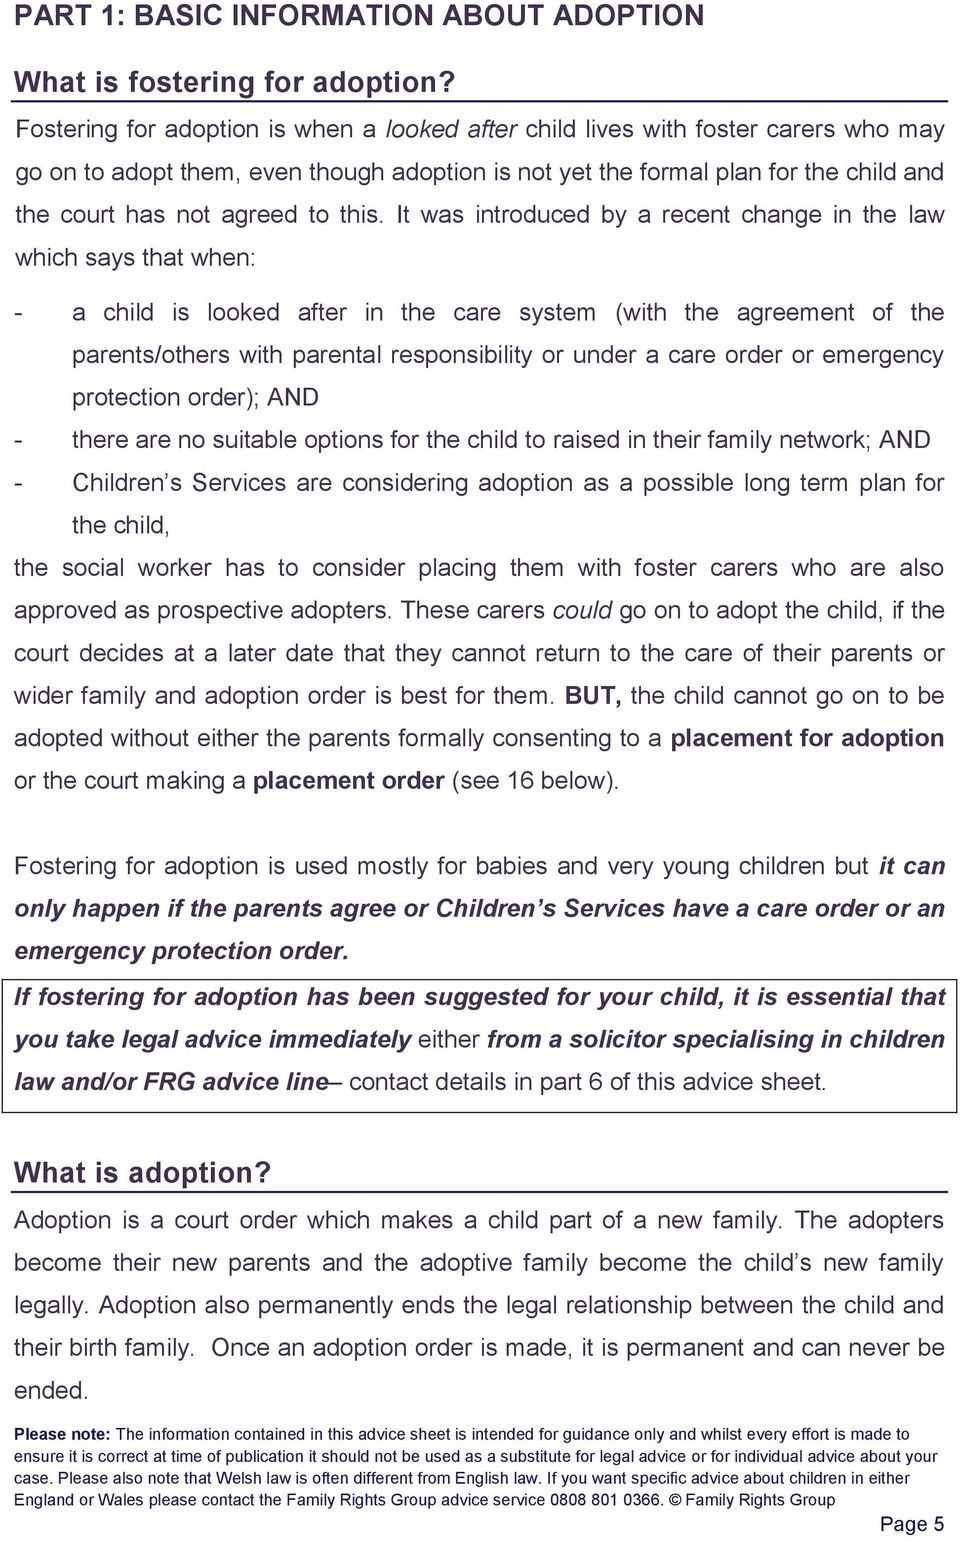 this. It was introduced by a recent change in the law which says that when: - a child is looked after in the care system (with the agreement of the parents/others with parental responsibility or